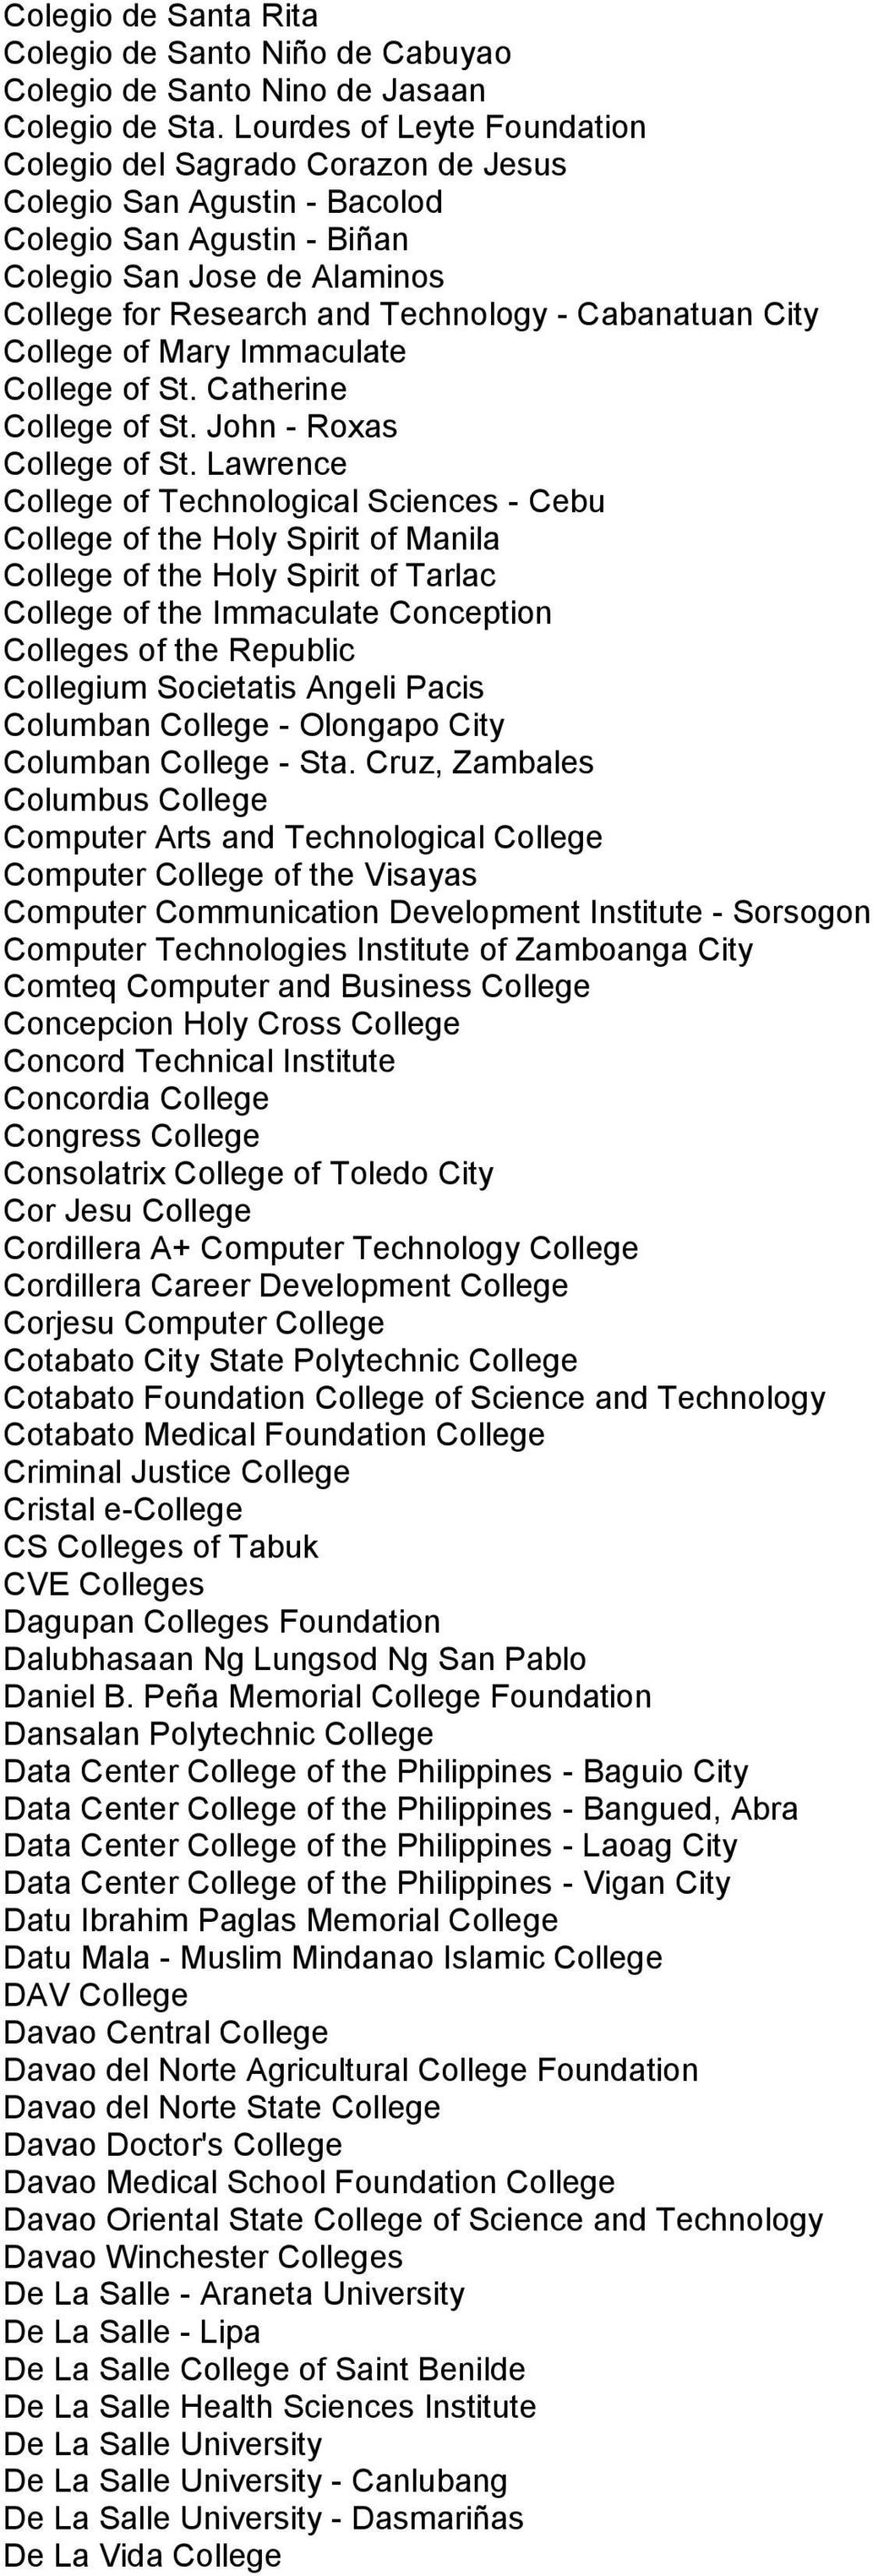 Cabanatuan City College of Mary Immaculate College of St. Catherine College of St. John - Roxas College of St.